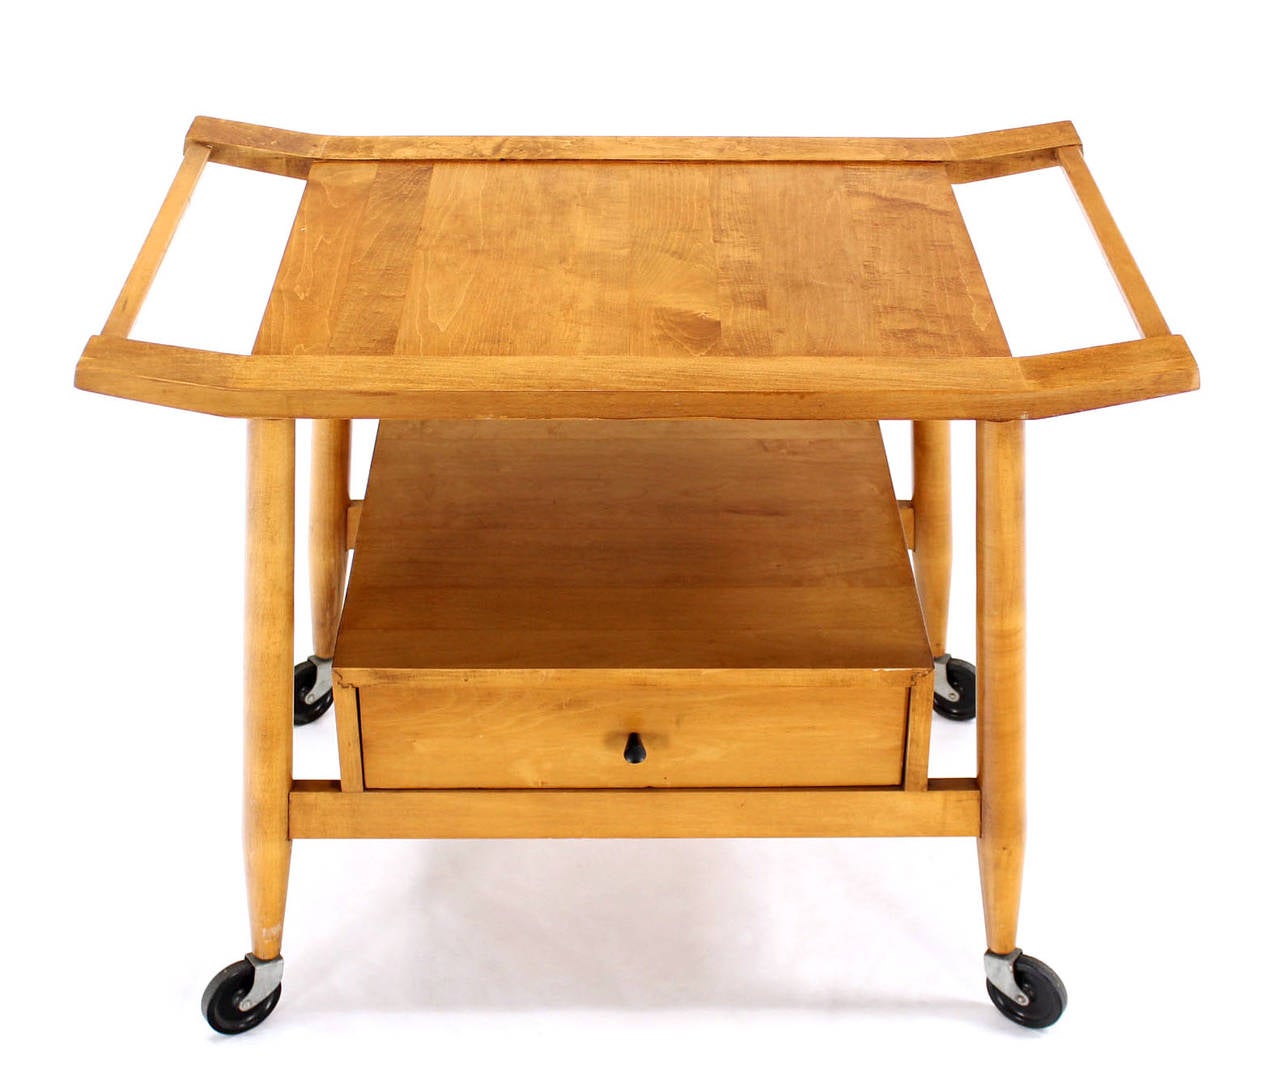 Very nice blond solid birch mid century cart in style of Paul McCobb.